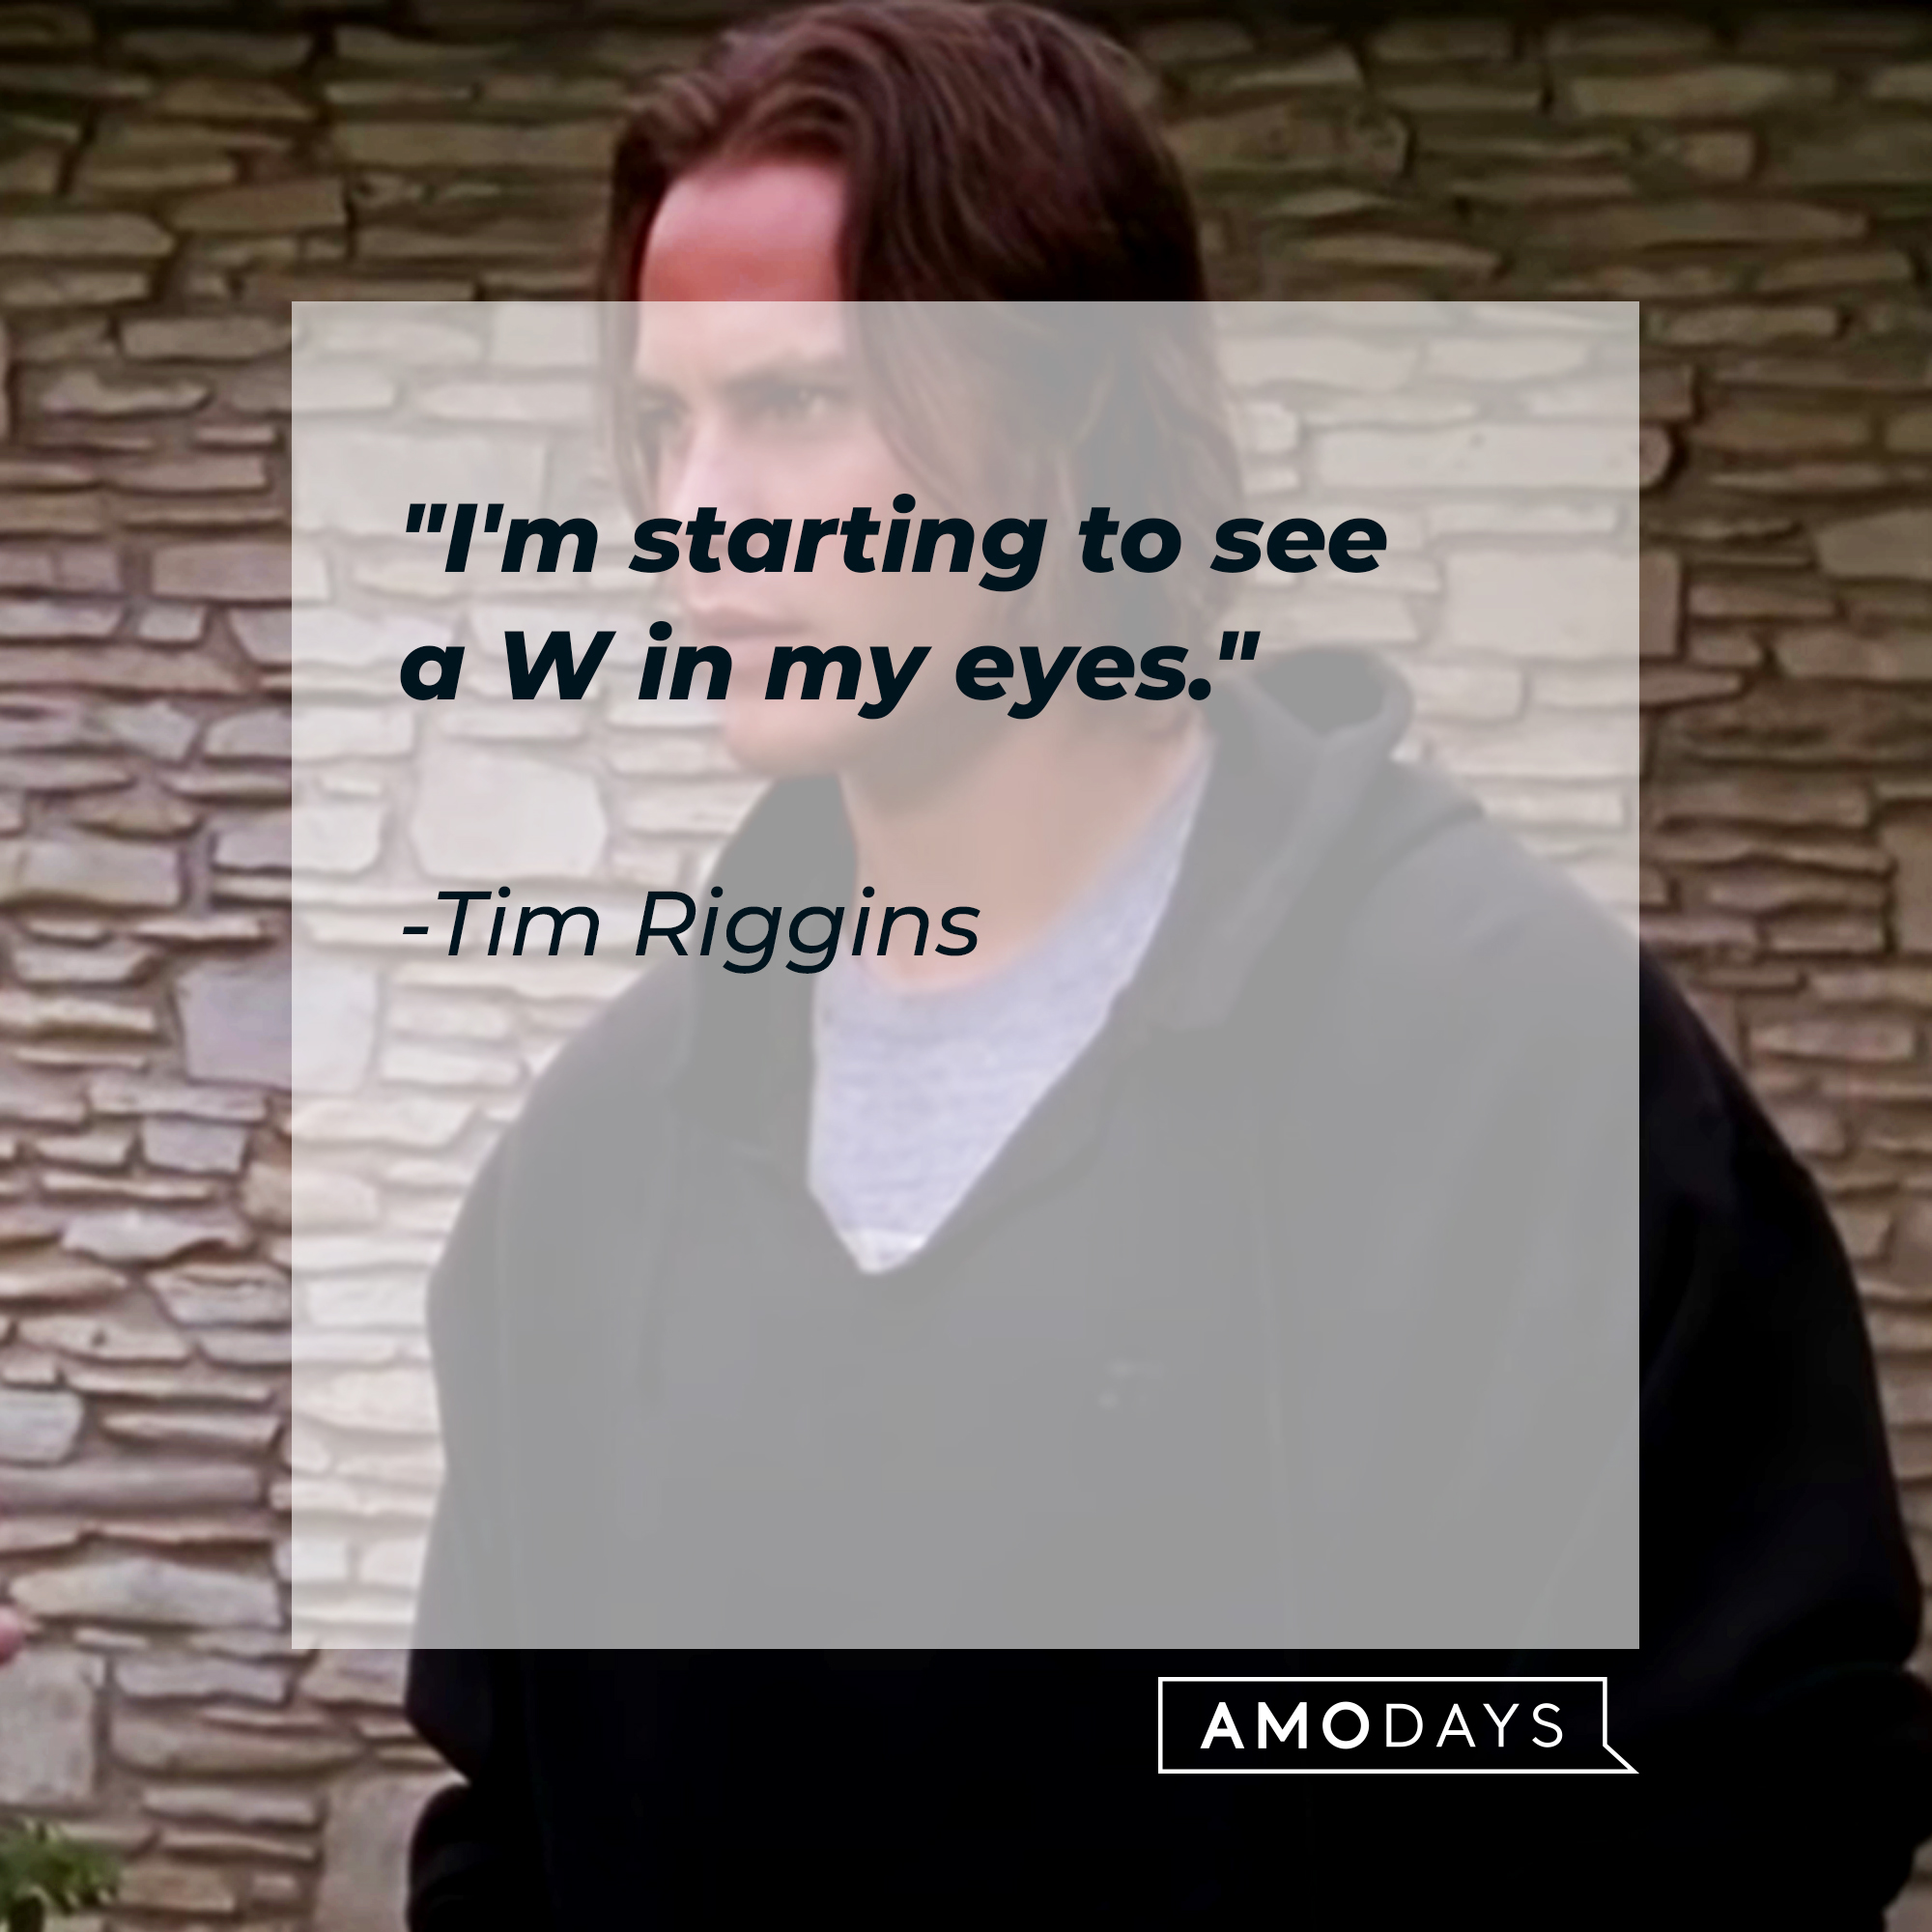 Tim Riggins' quote, "I'm starting to see a W in my eyes." | Source: Facebook/fridaynightlights